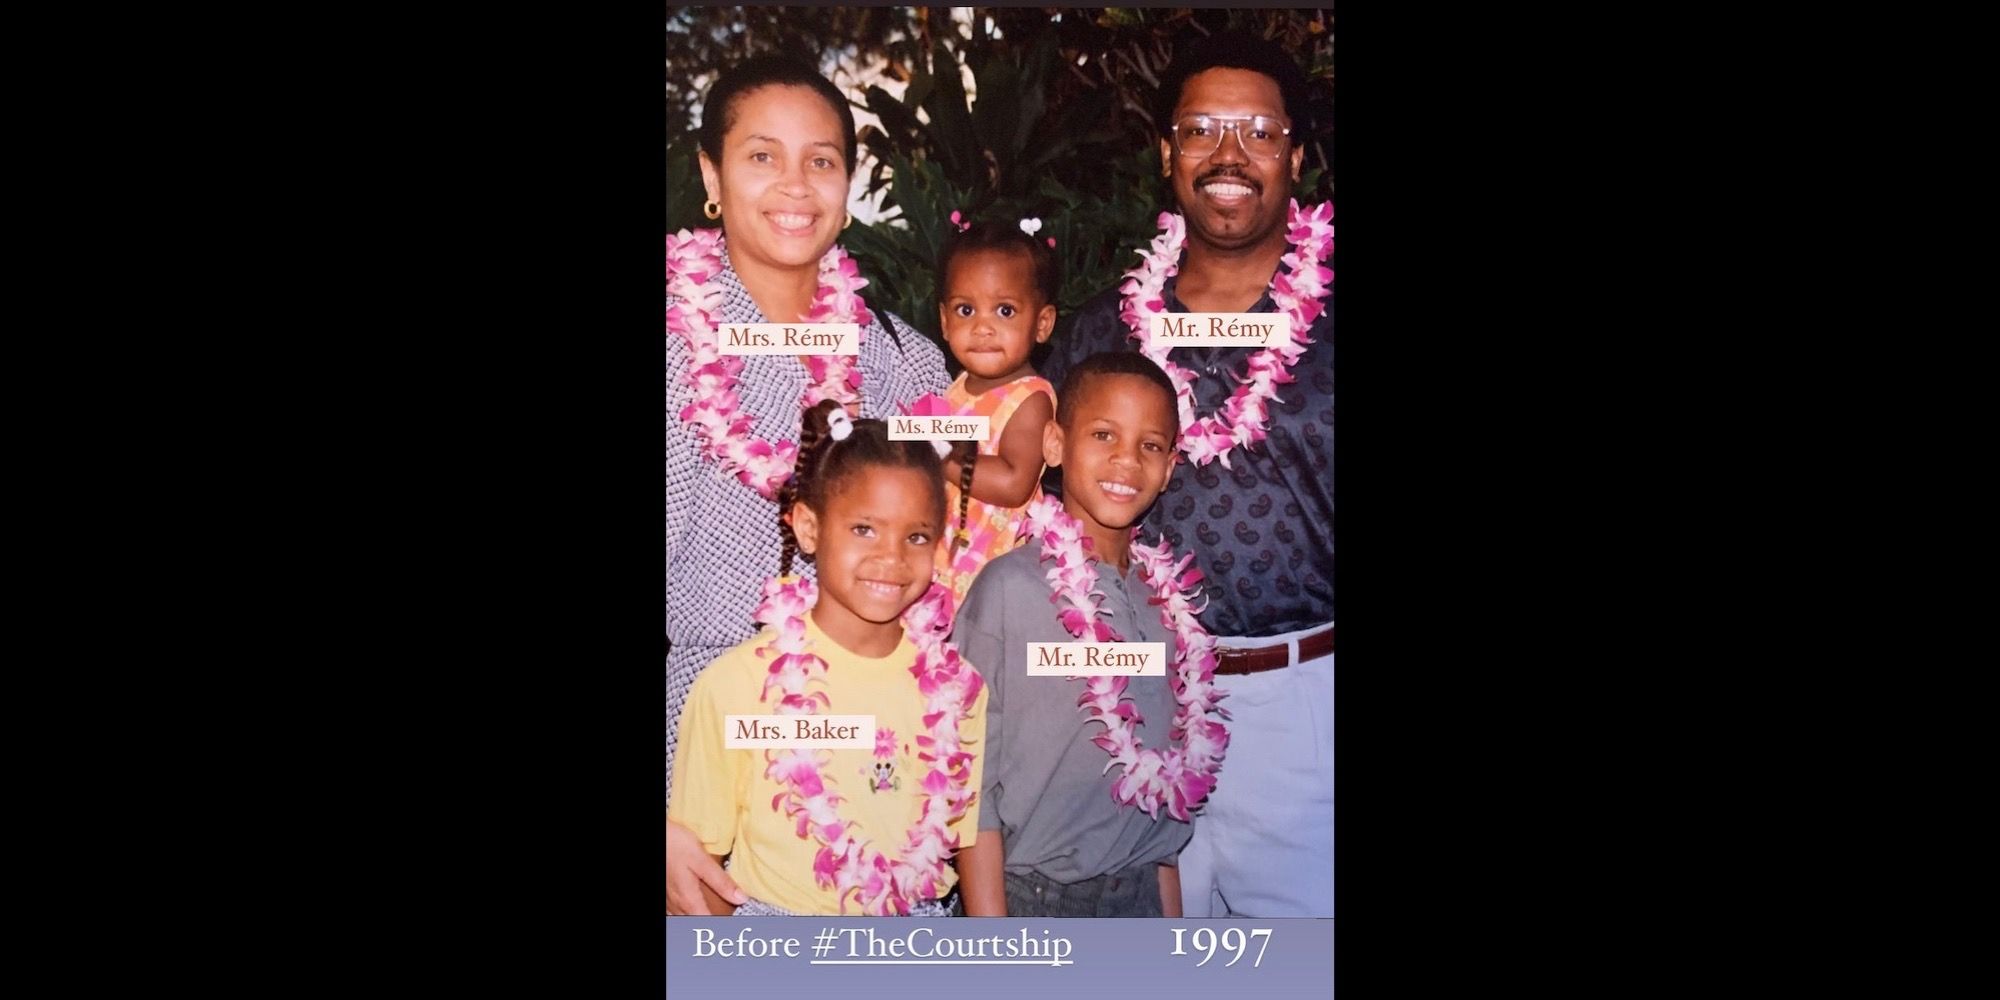 The Courtship: Nicole Rémy Shares Throwback Family Photo